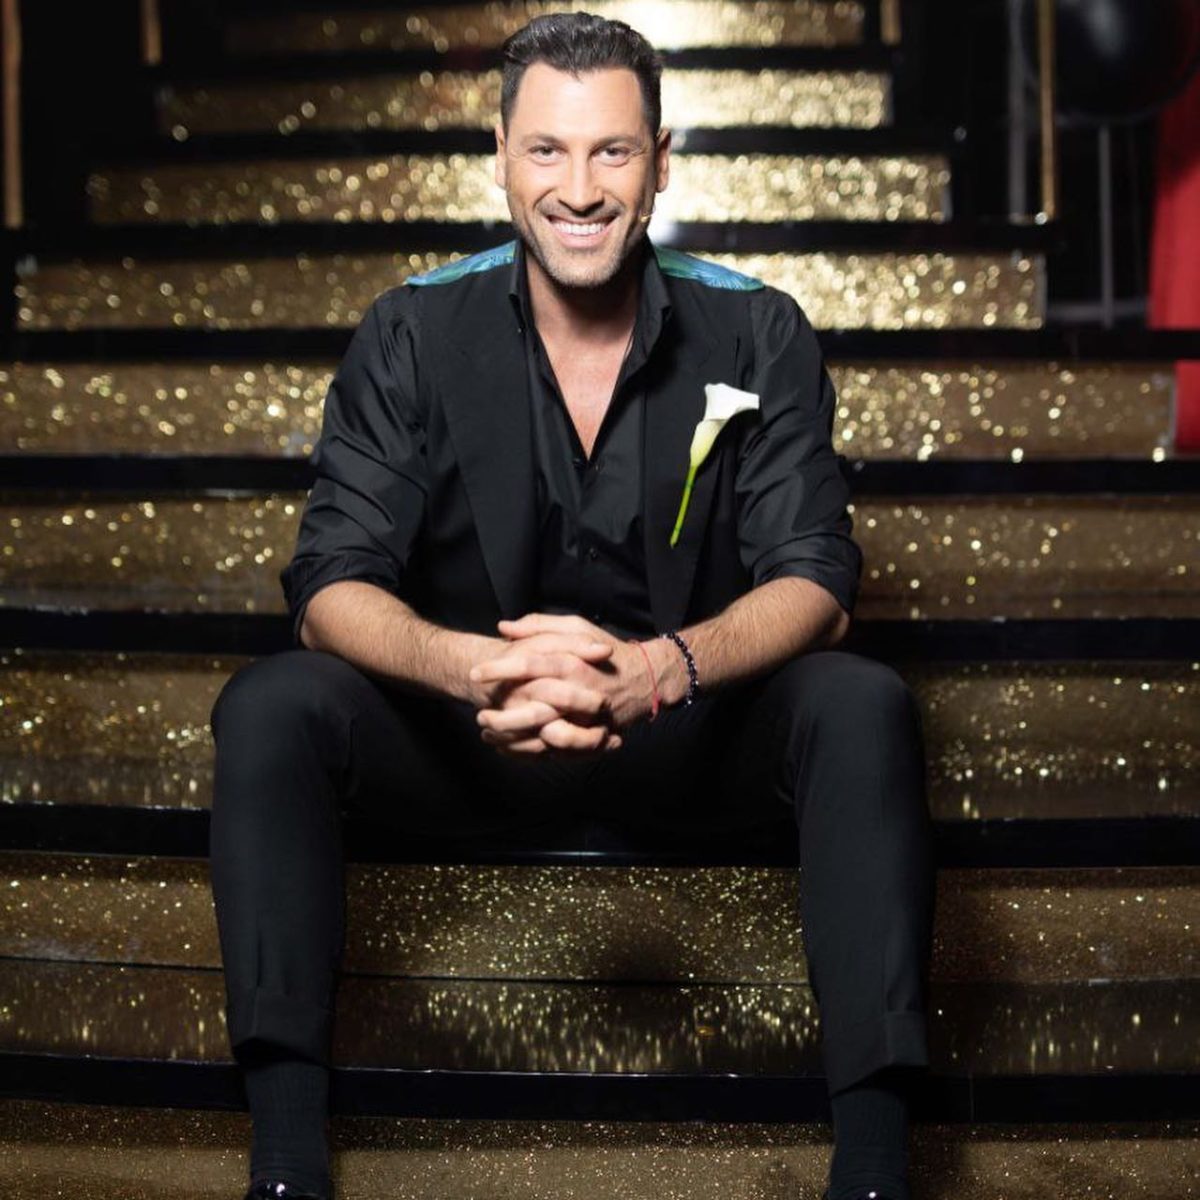 maks chmerkovskiy escapes ukraine but admits he’s struggling with returning to his family | maks chmerkovskiy expressed feelings of guilt as he escaped ukraine while others are left behind to deal with the brutal consequences of russia's invasion.